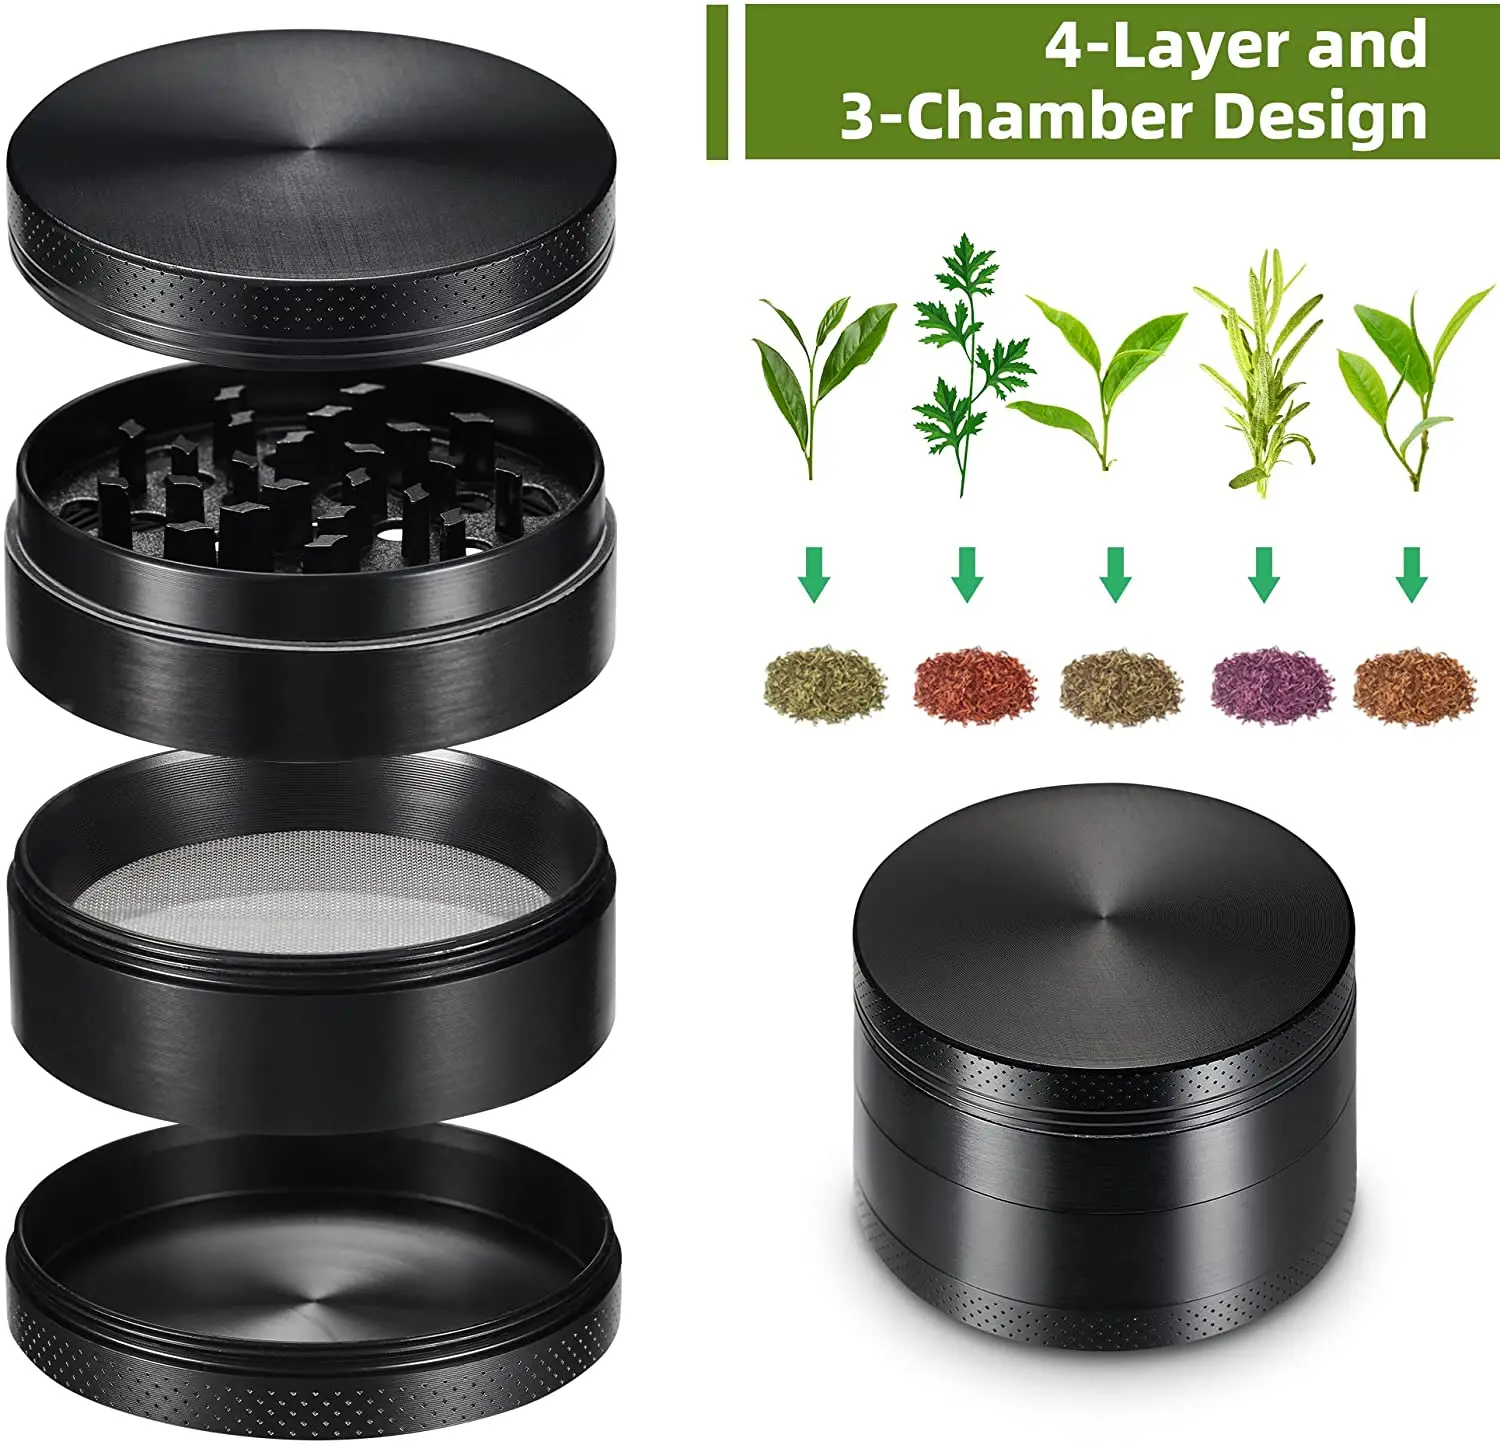 

40mm 4-Layer Aluminum Herbal Herb Tobacco Grinders for Smoking Tobacco Cutting Pipe Accessories Tobacco Pipes Pipas Fumar